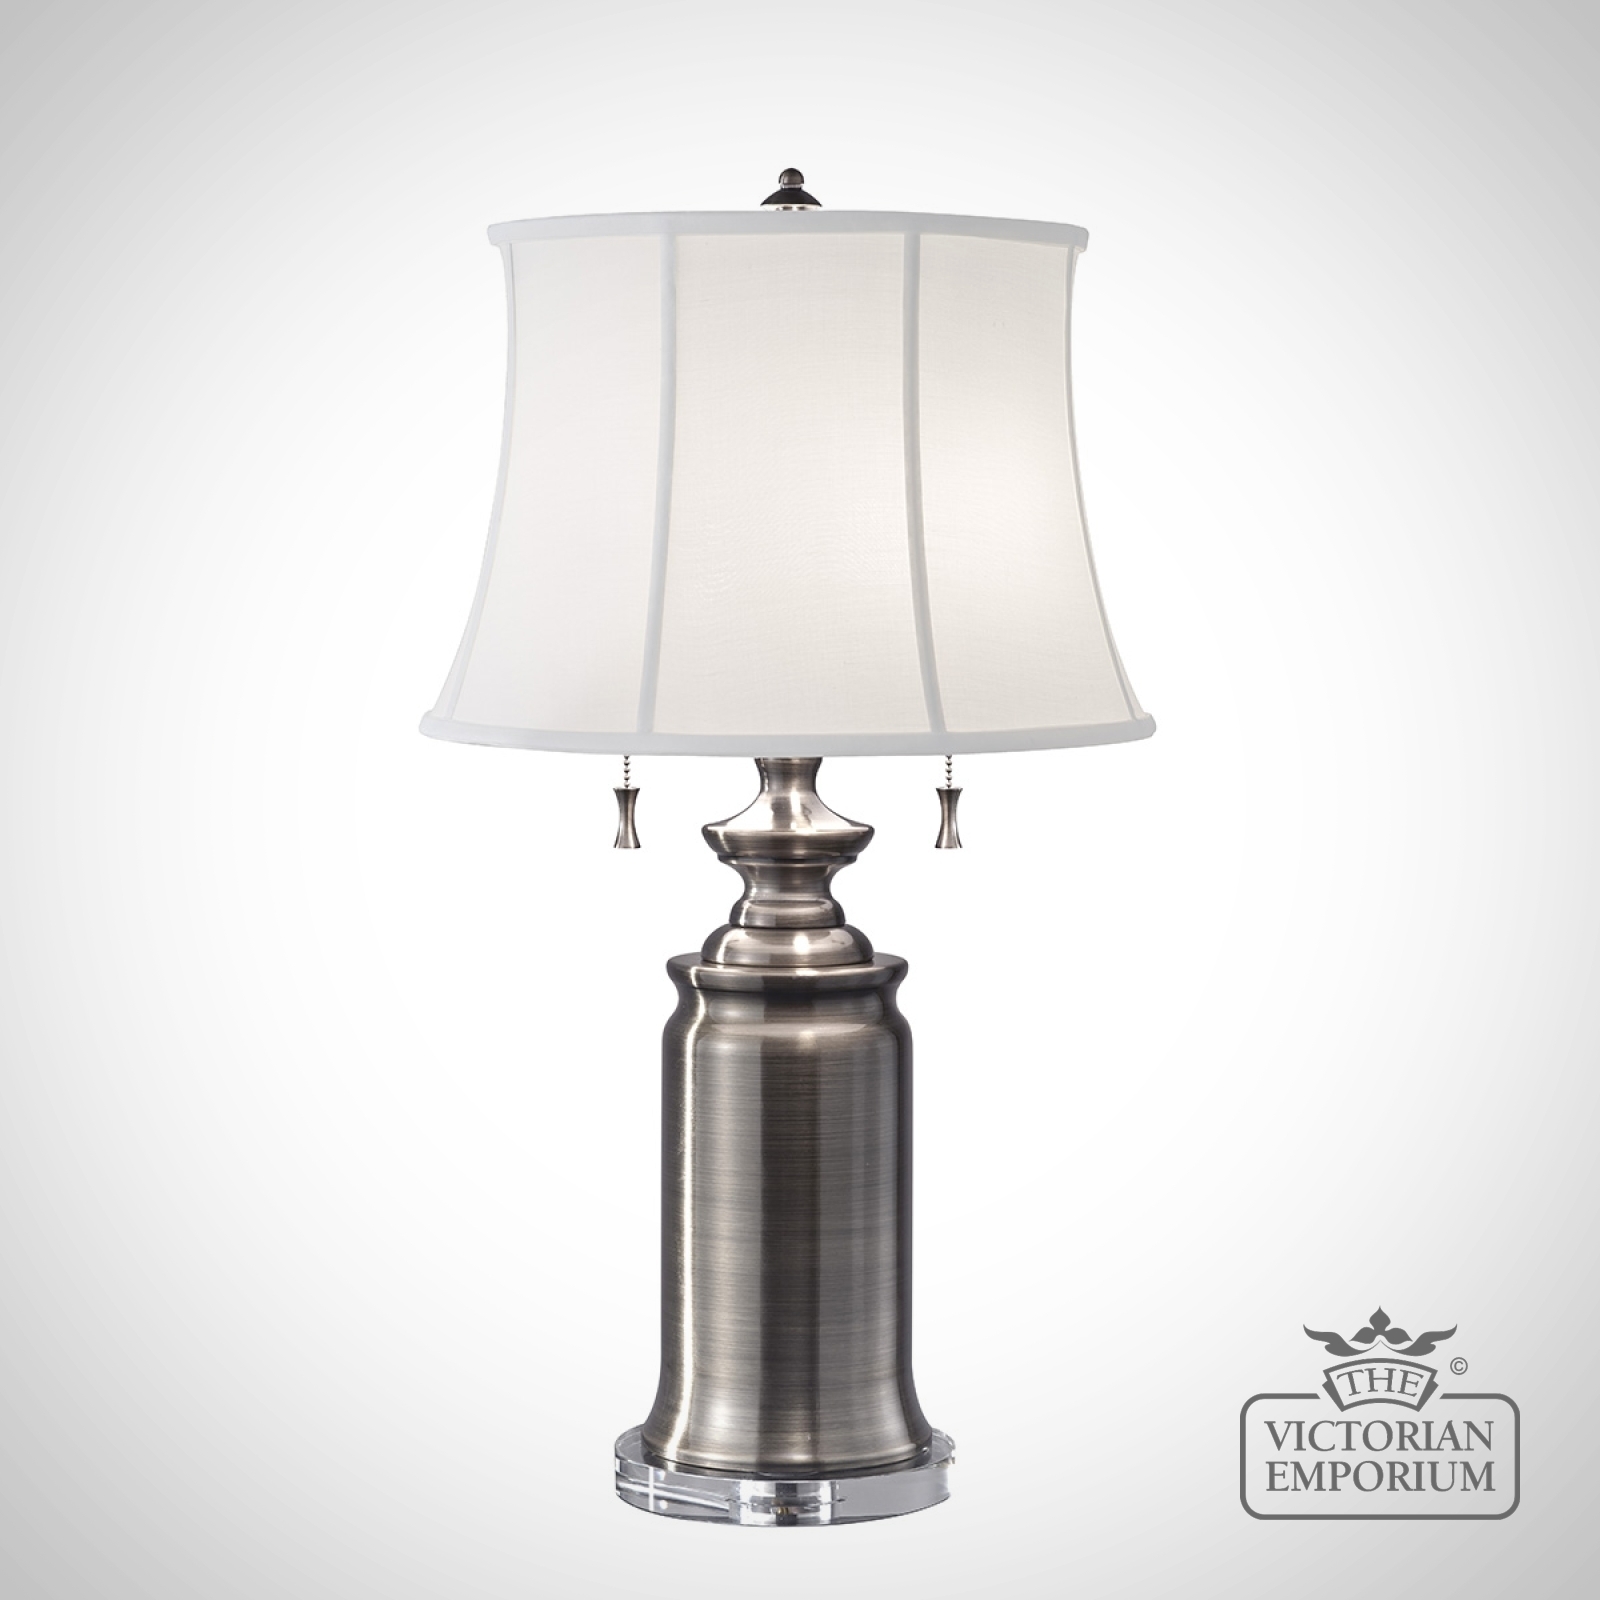 Stateroom Brass Table Lamp with White cotton linen shade